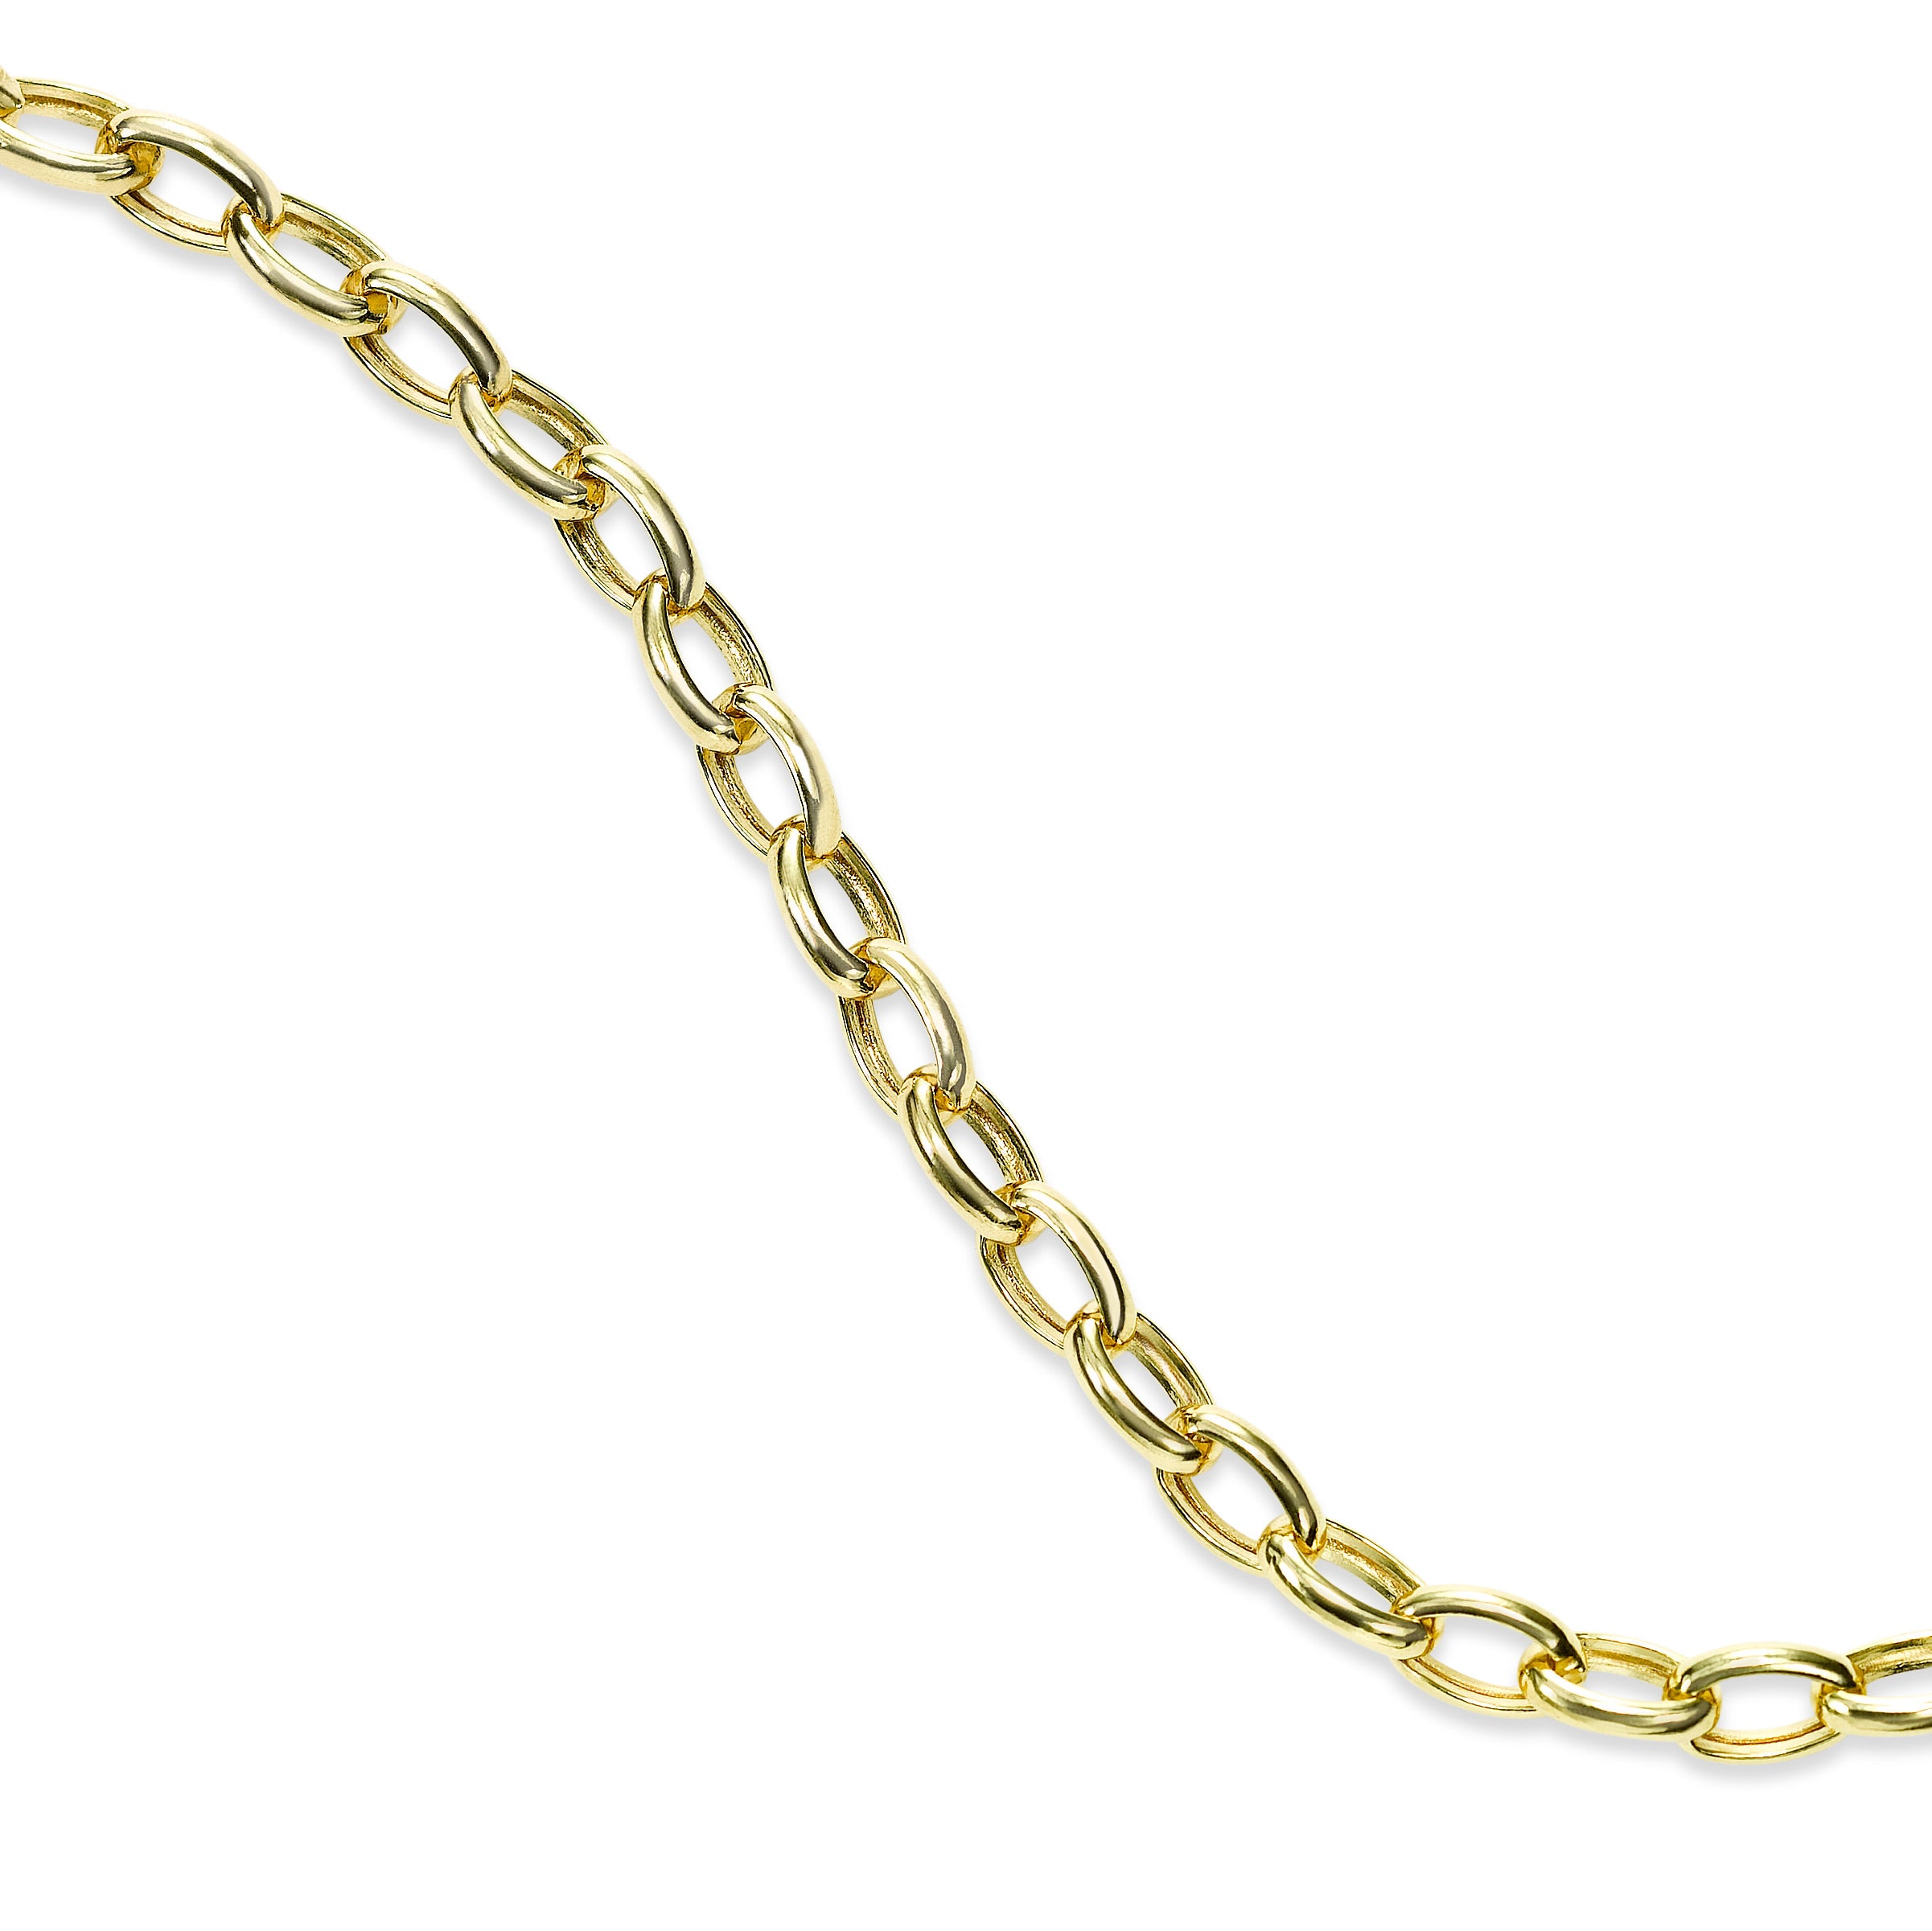 Shiny and Bold Link Bracelet, Sterling Silver – Fortunoff Fine Jewelry